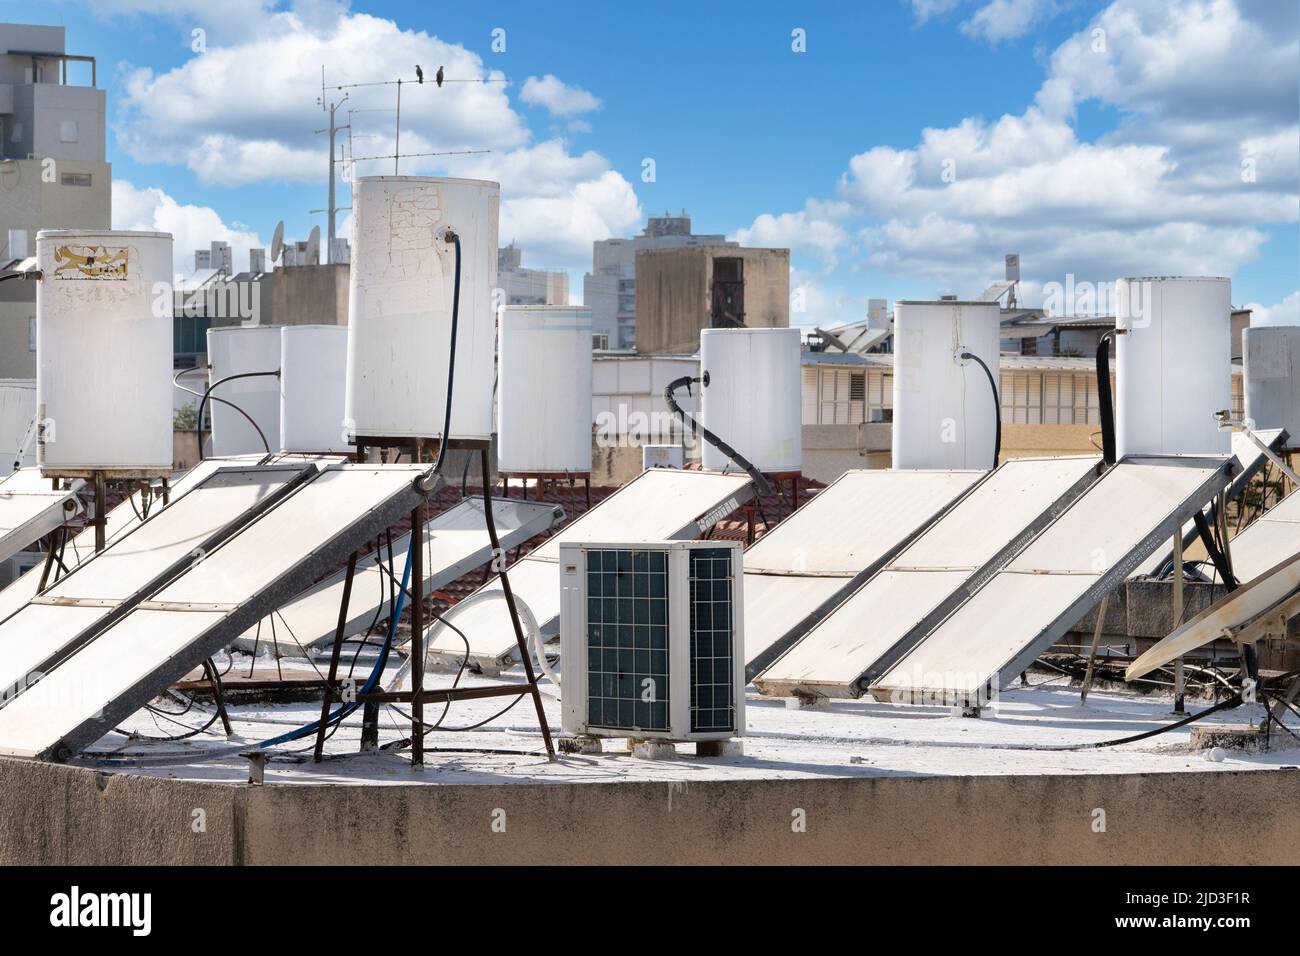 A lot of solar water heating systems installed on the roof of the house in Israel Stock Photo